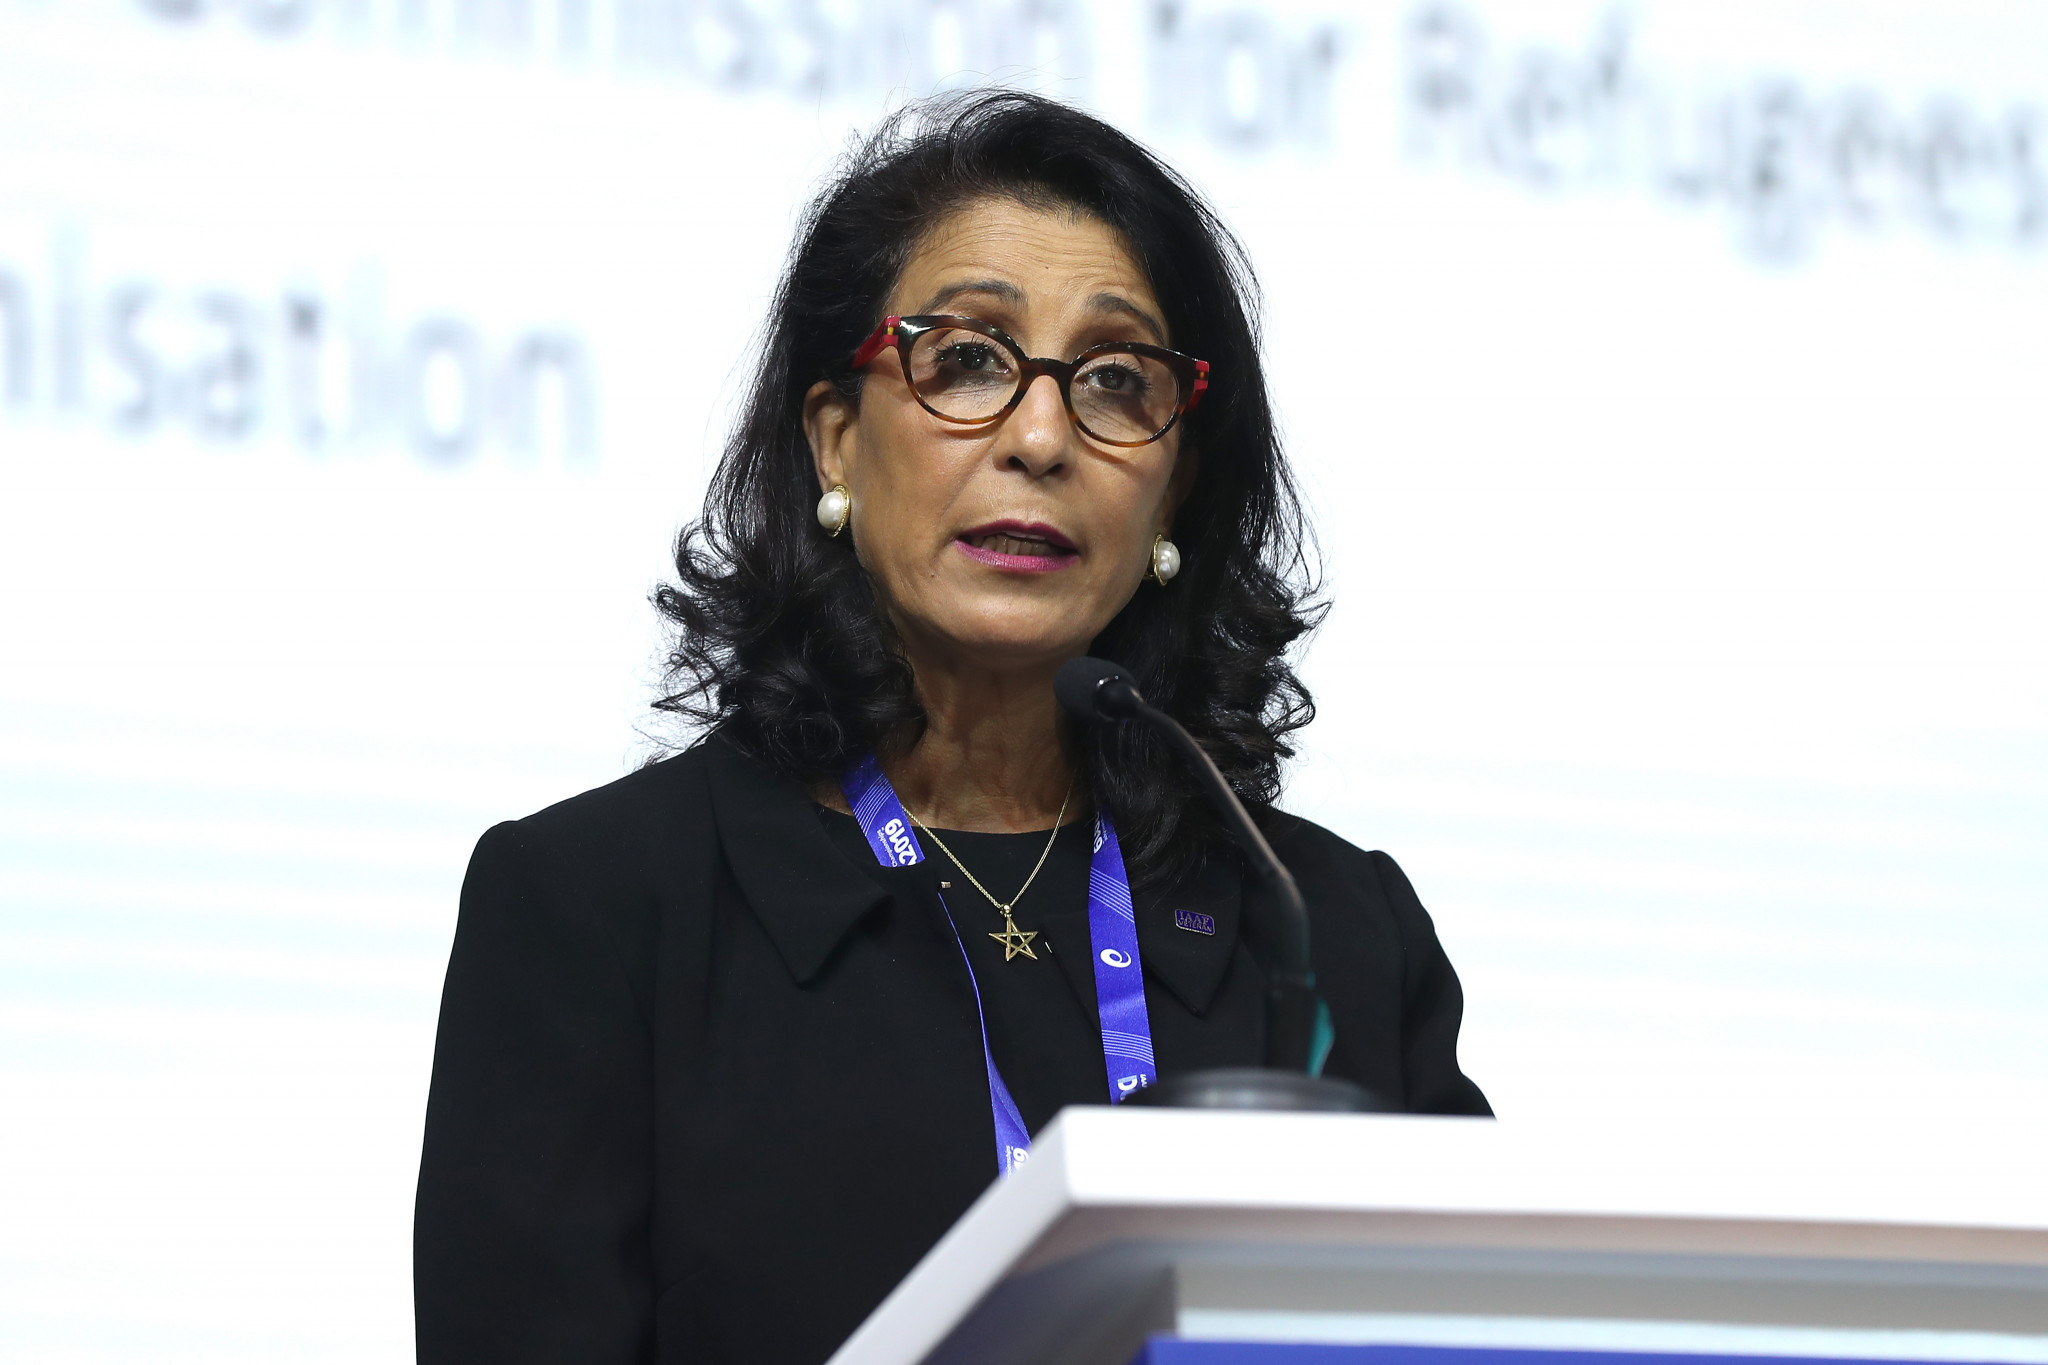 Morocco's Nawal El Moutawakel was re-elected to the IAAF Council ©Getty Images